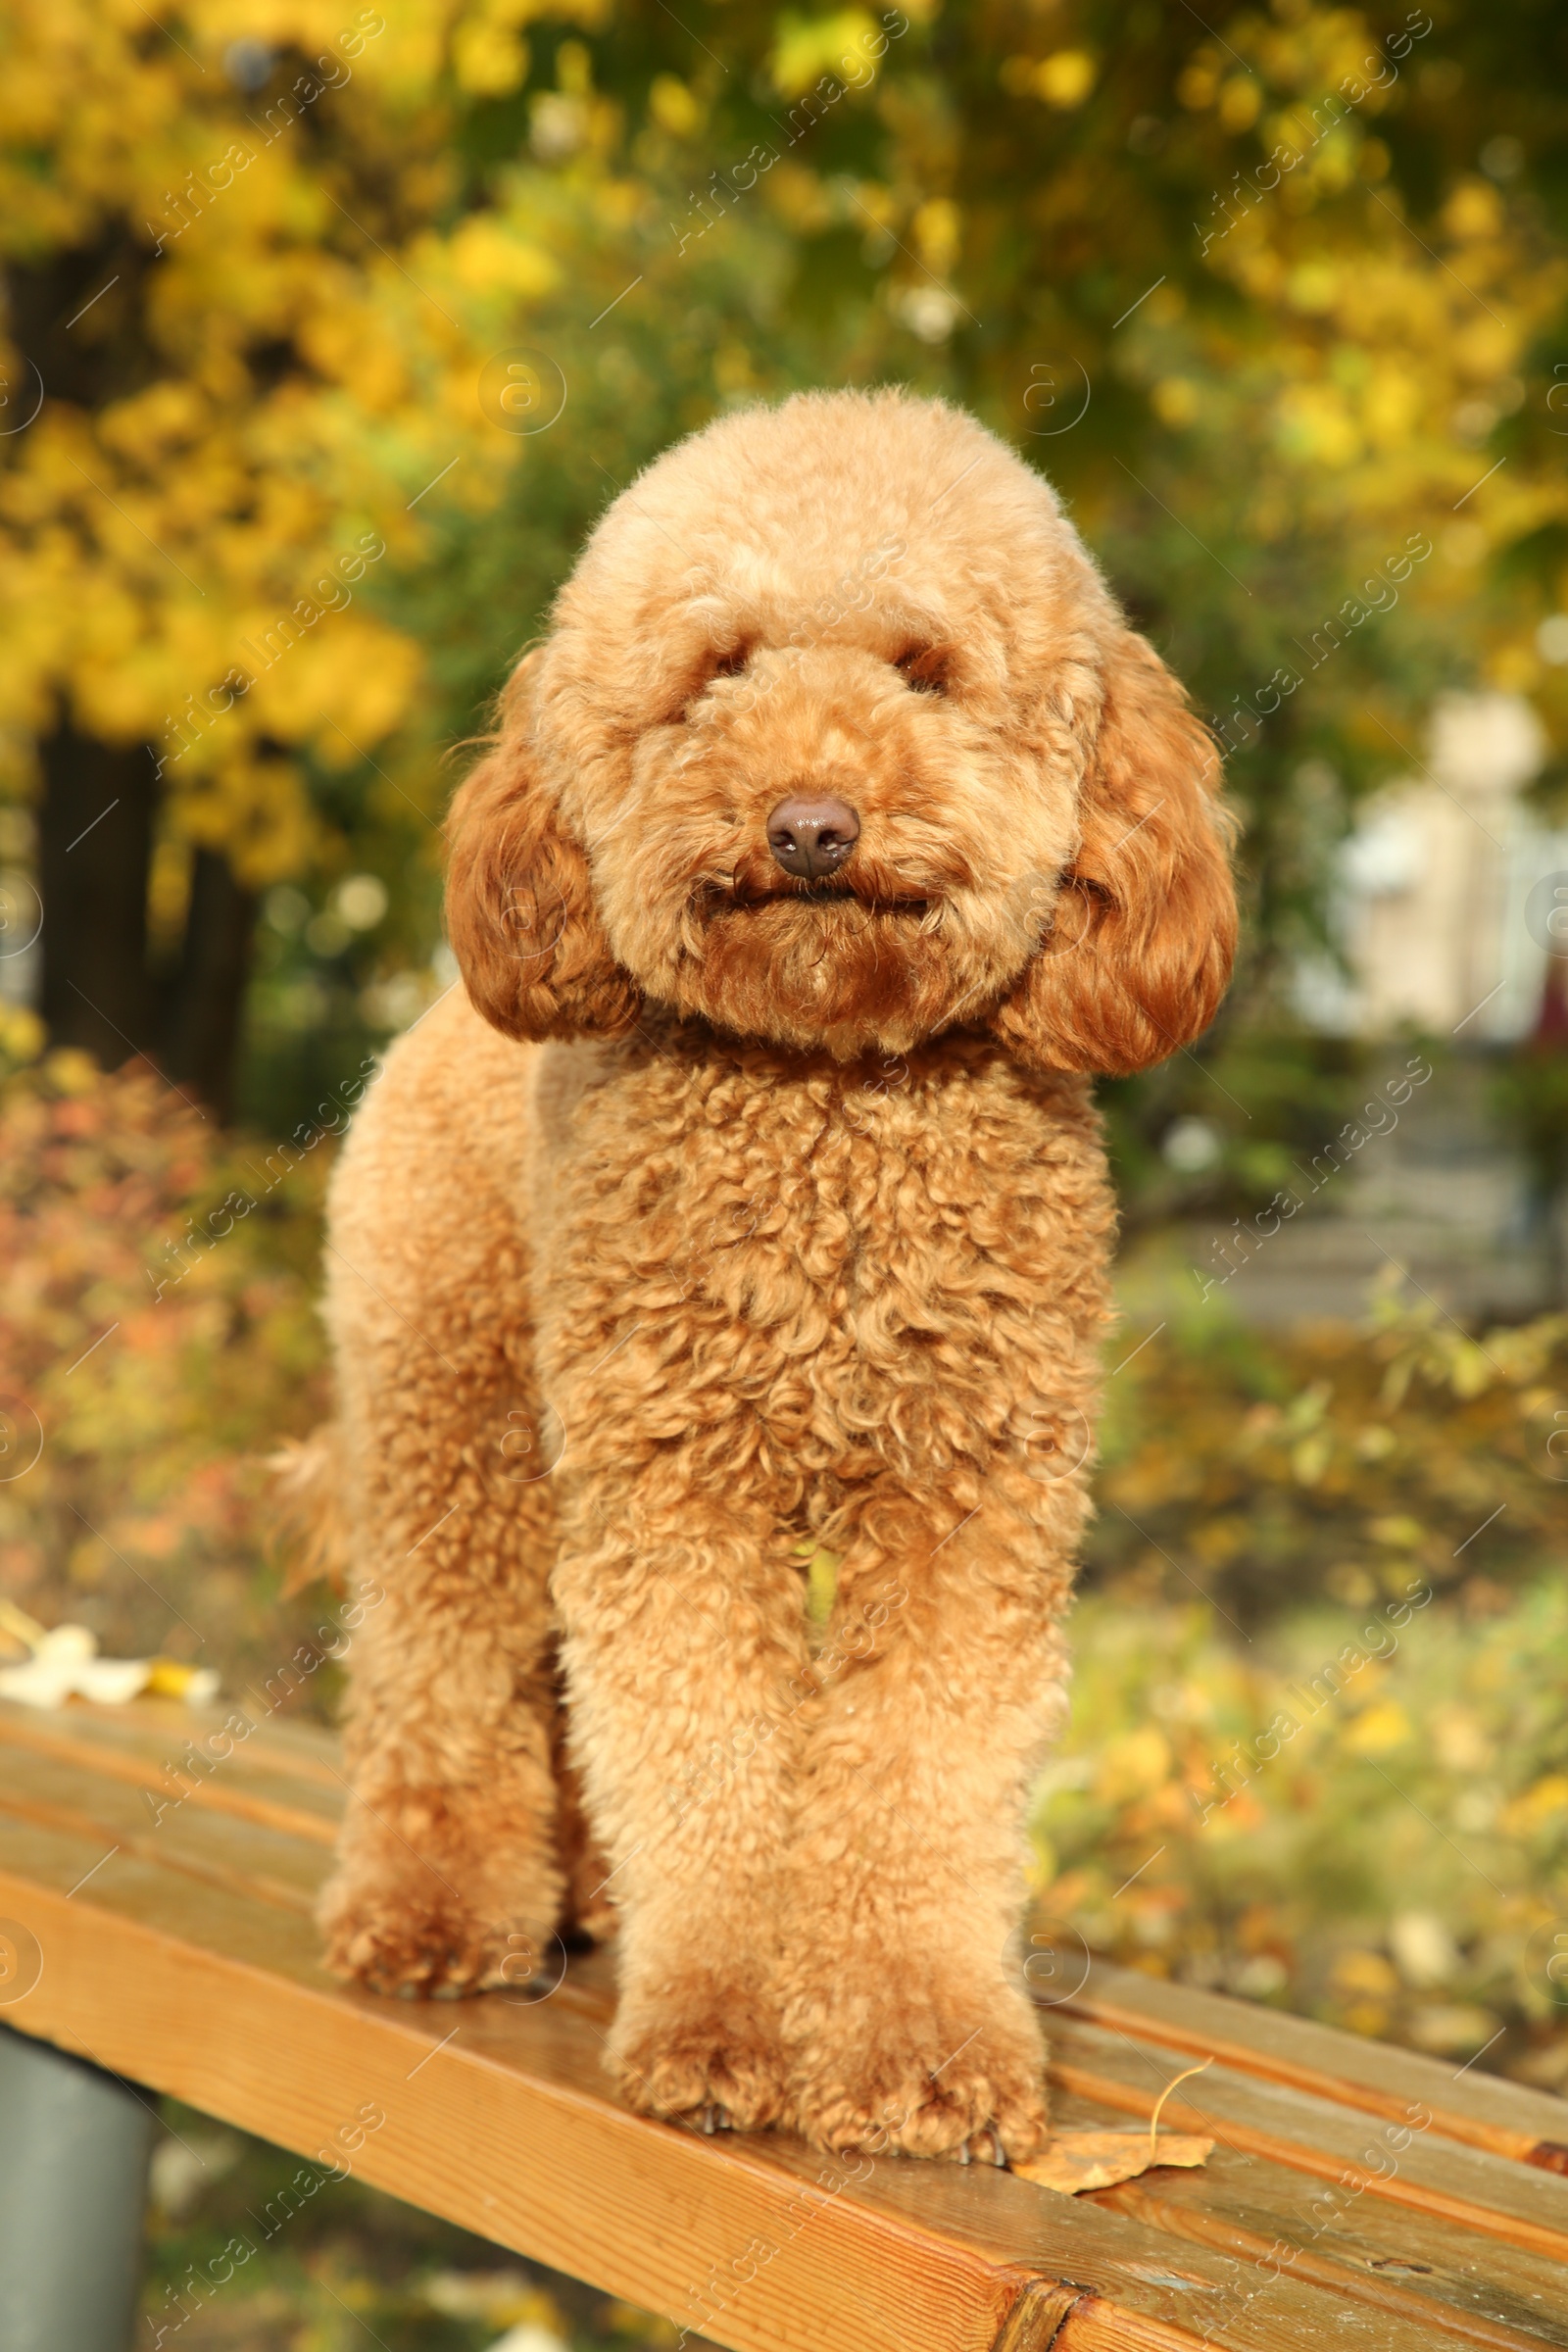 Photo of Cute dog on wooden bench in autumn park